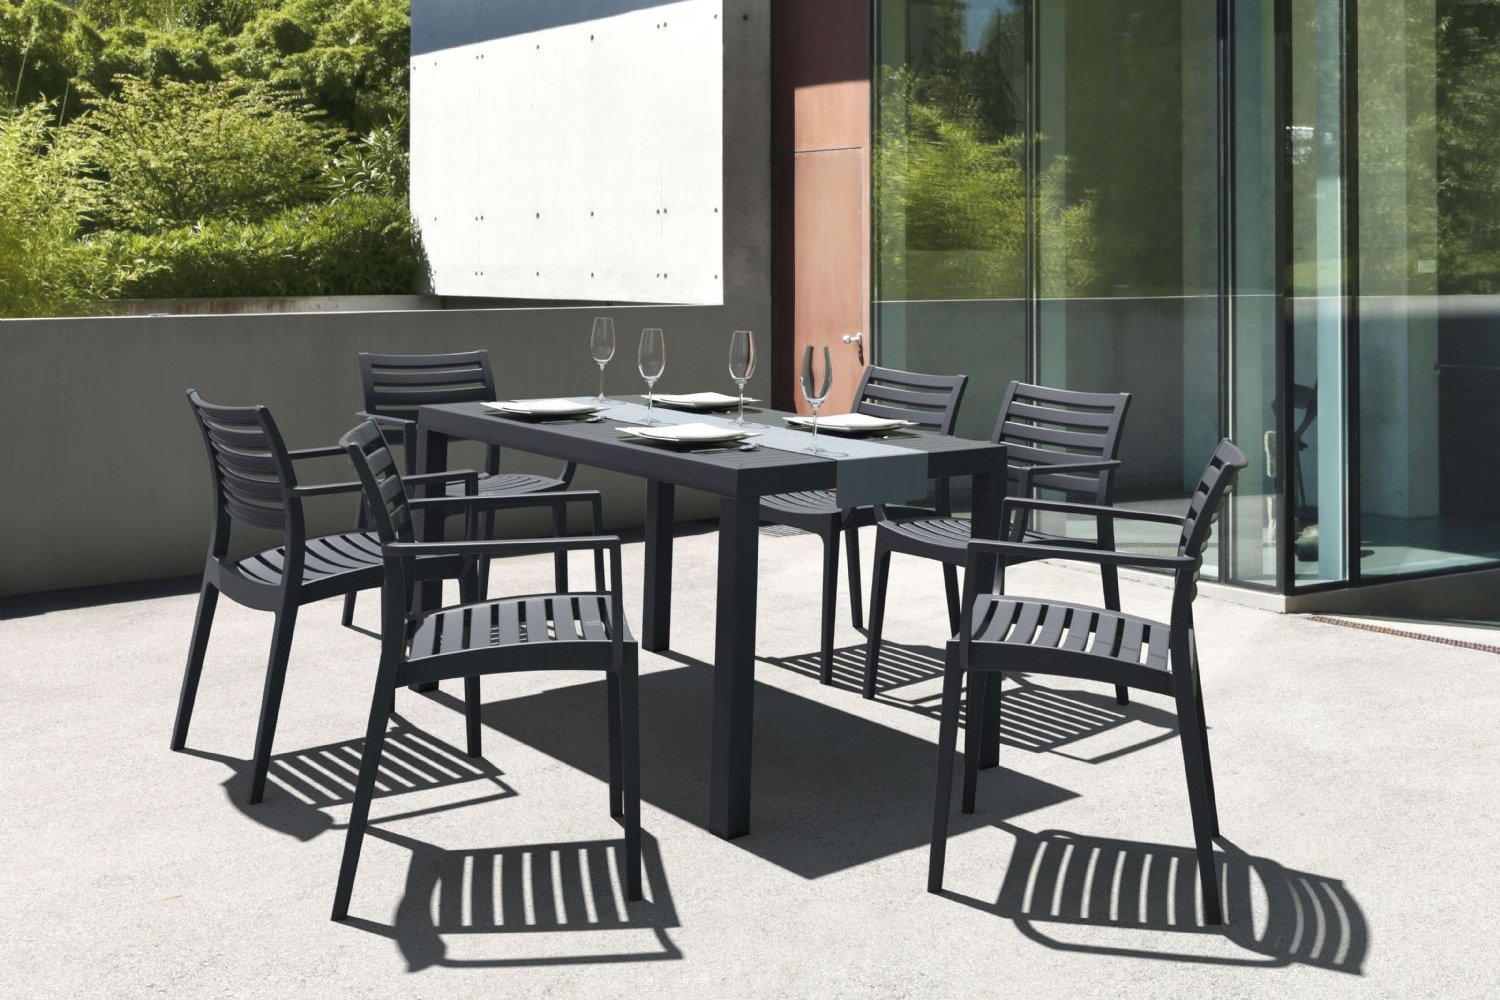 Artemis Resin Rectangle Outdoor Dining Set 7 Piece with Arm Chairs Cafe Latte ISP1862S-TEA - 5